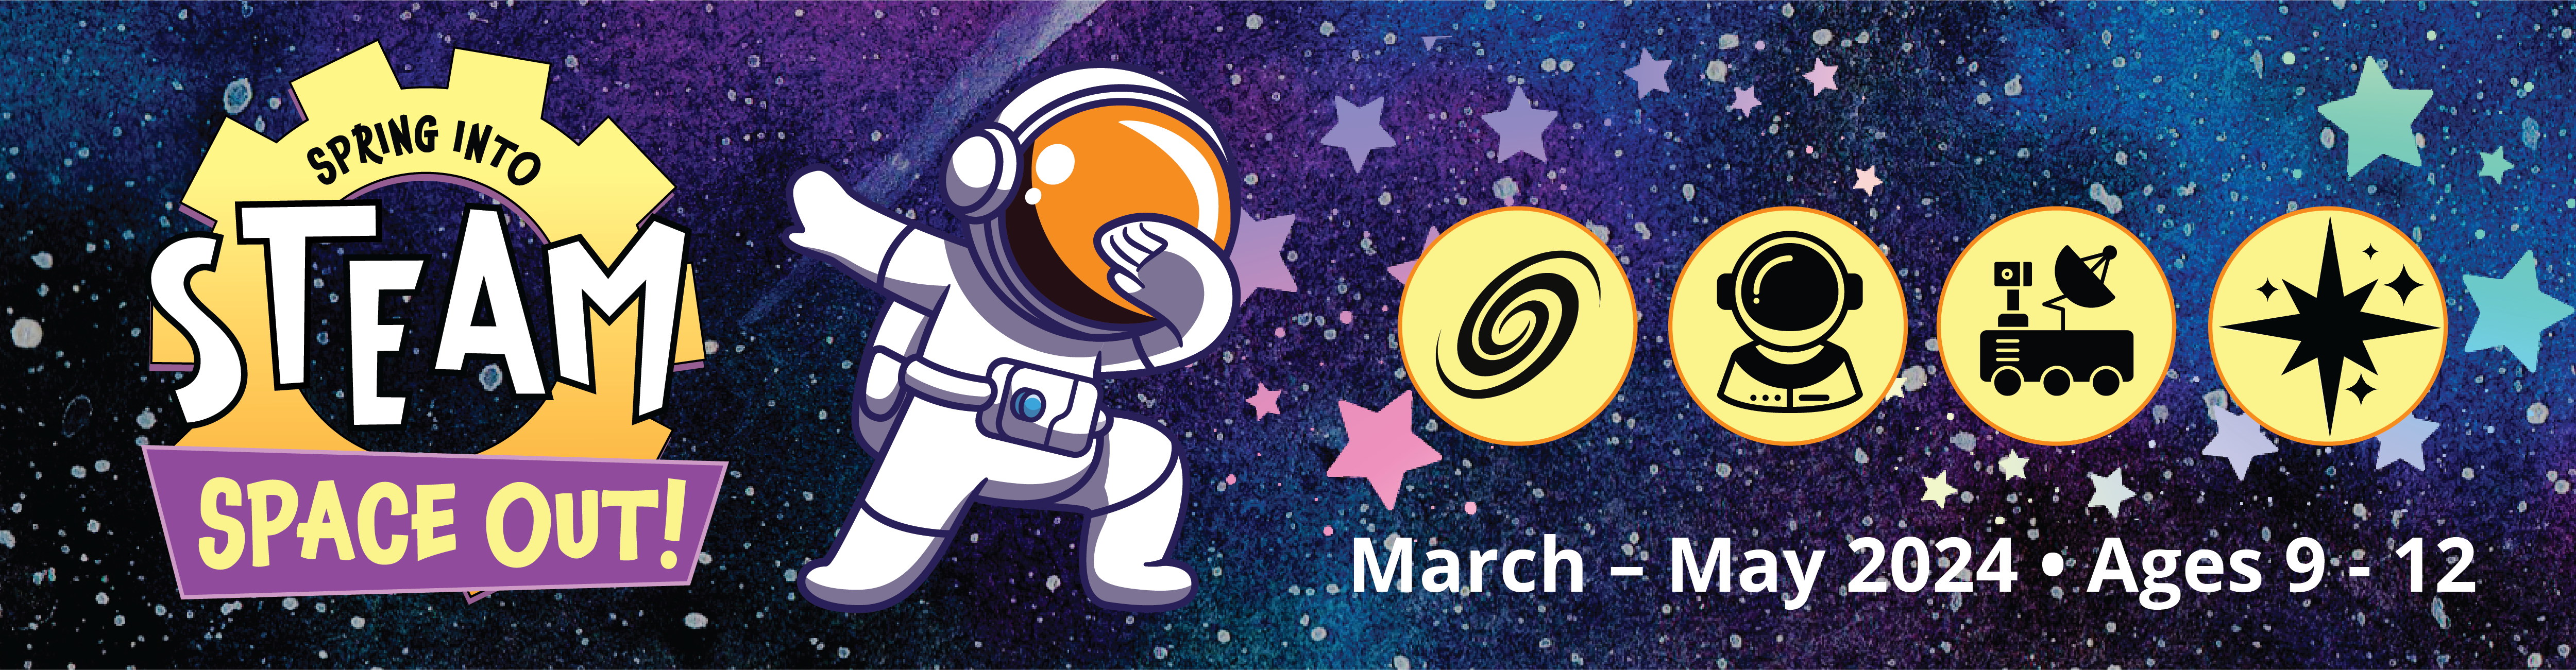 Spring into STEAM banner - astronaut dabbing in space